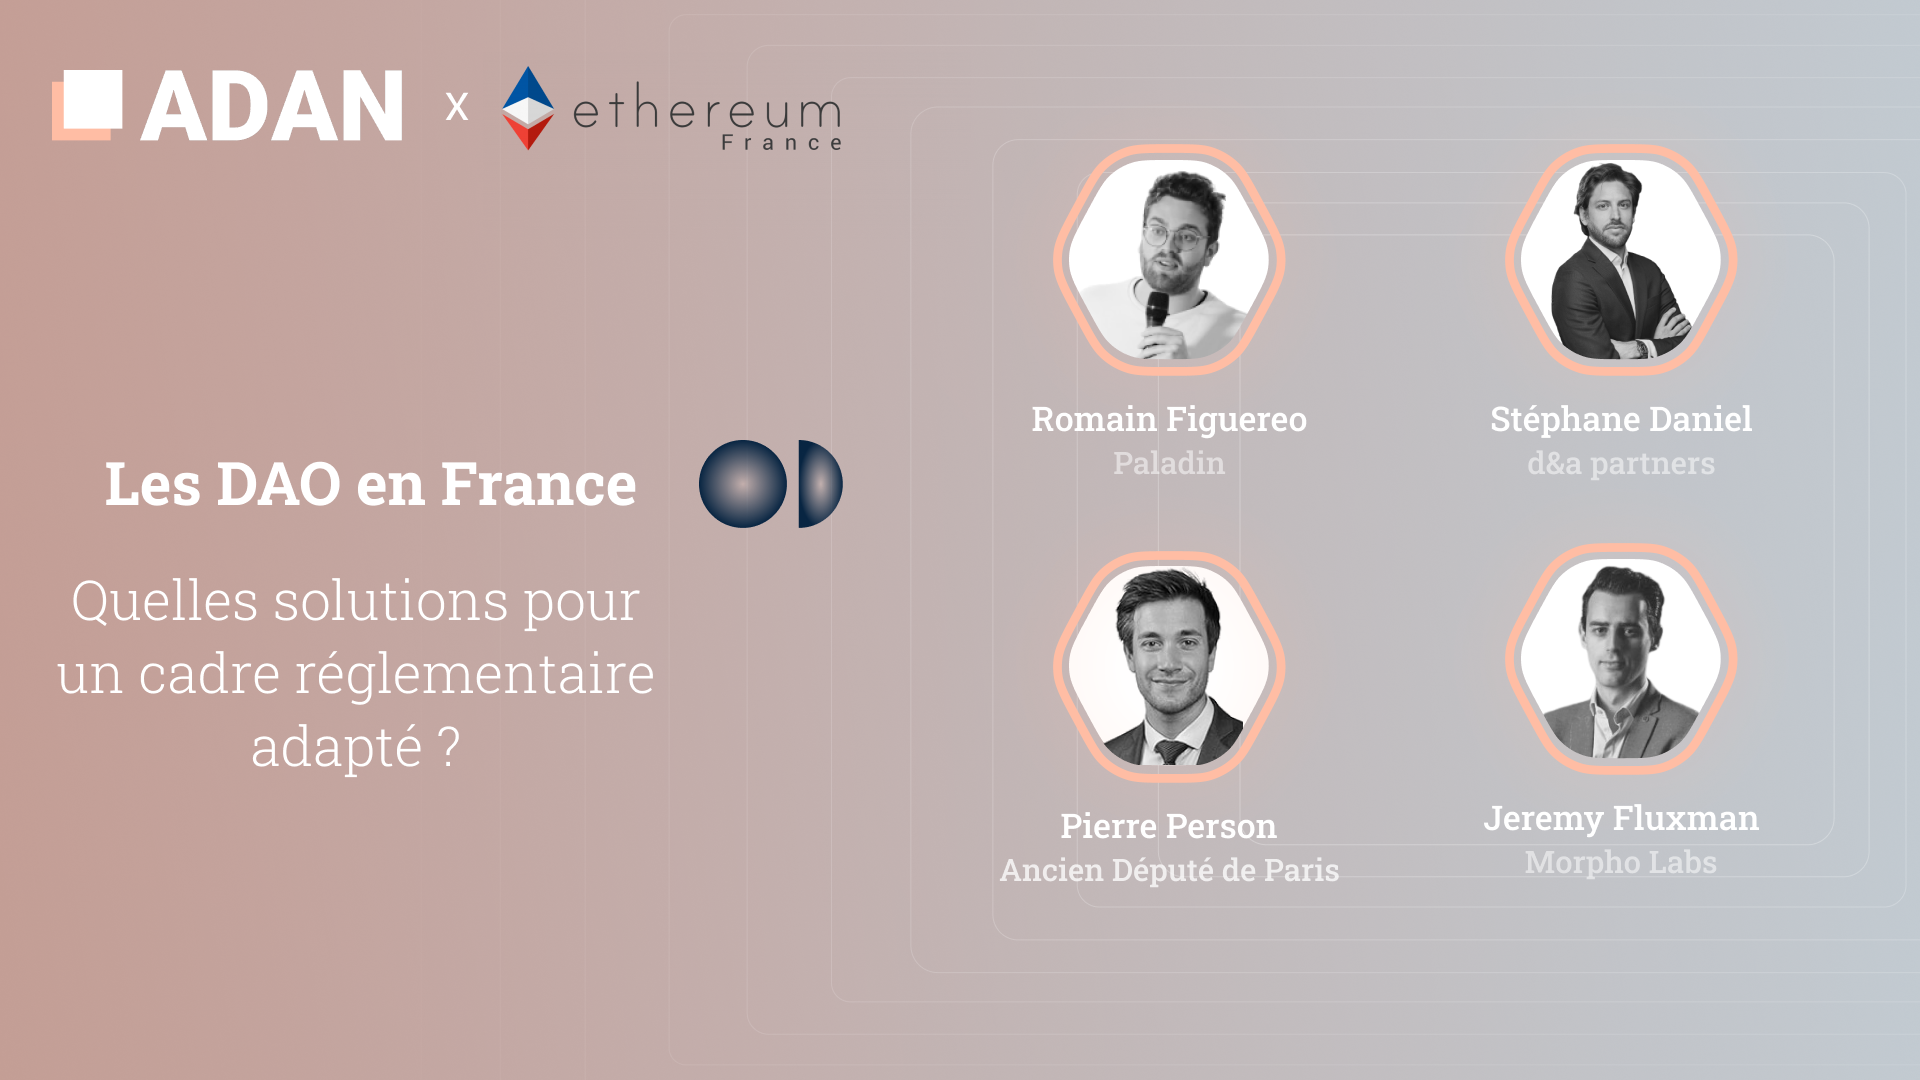 Replay of the event between Adan and Ethereum France at Cometh: “The regulation of DeFi and DAOs”